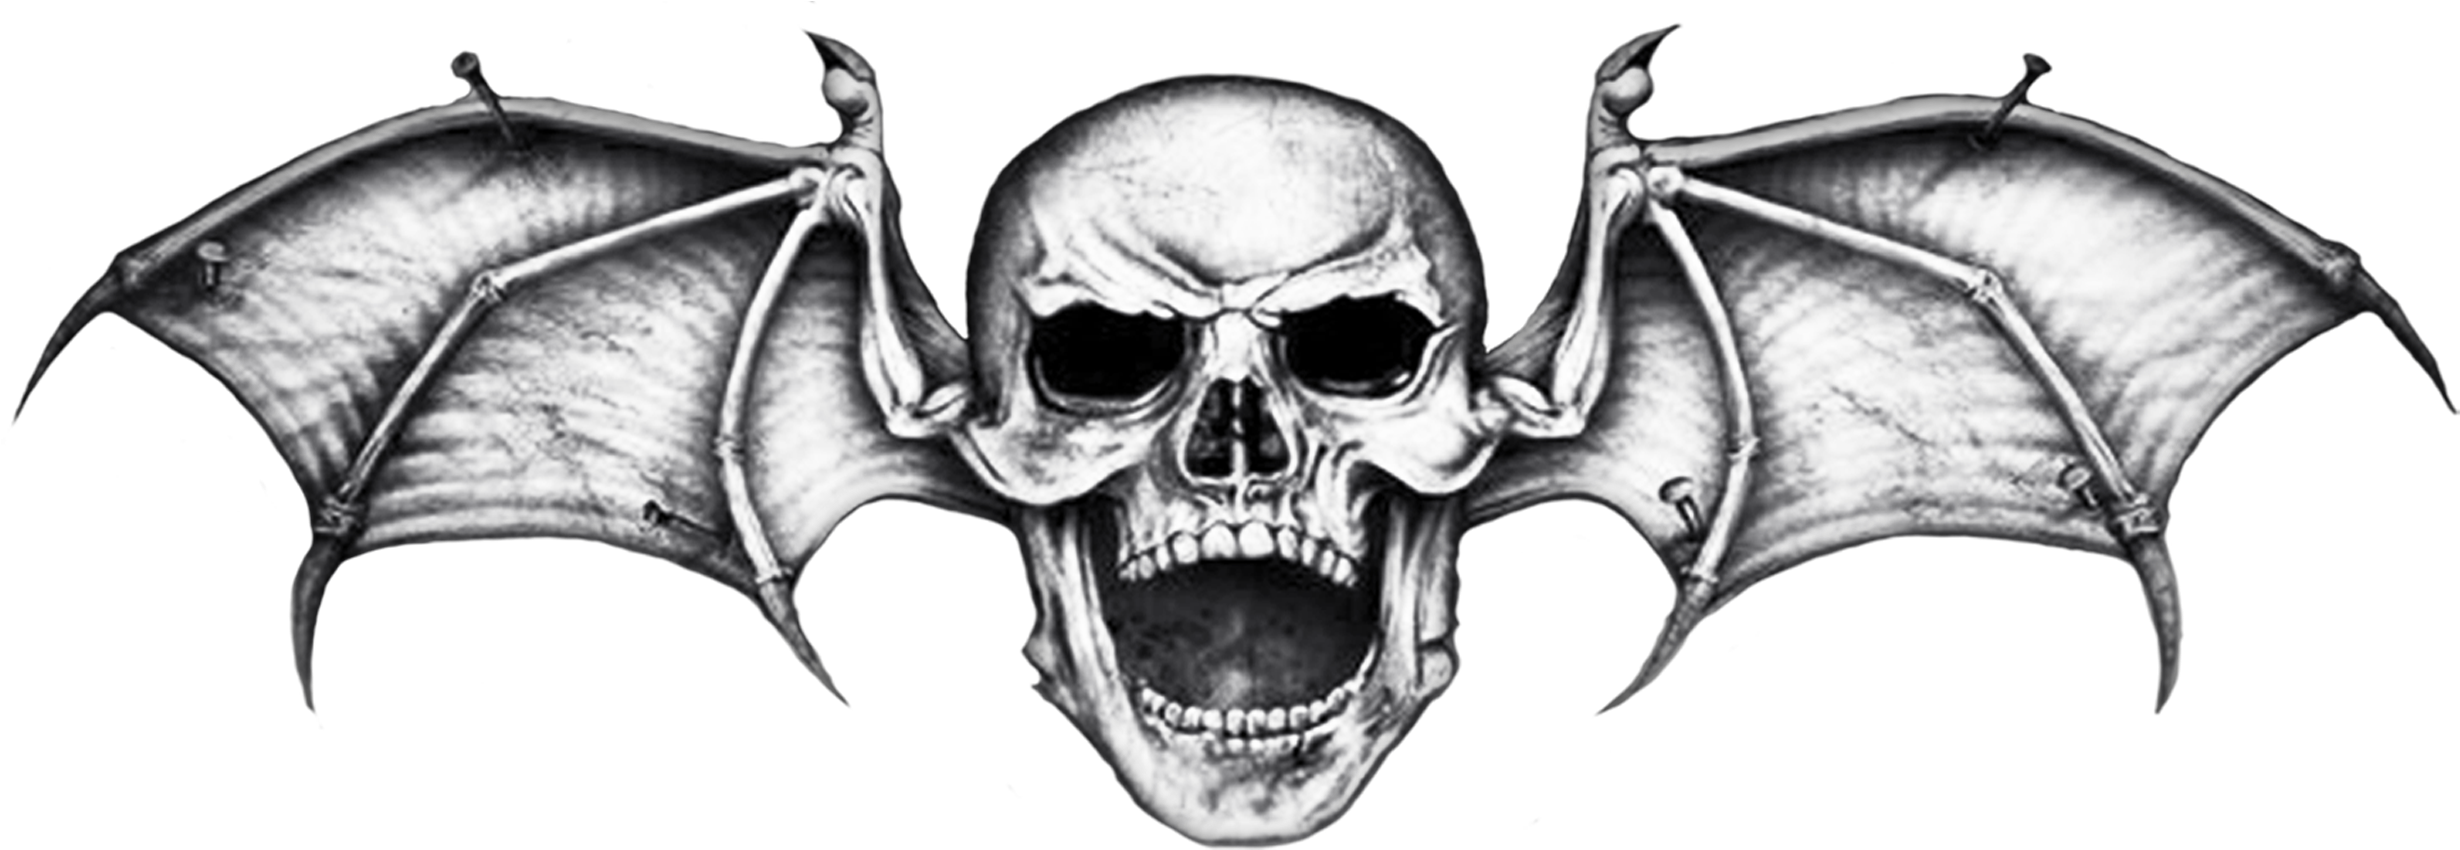 Hail to the King: Deathbat Avenged Sevenfold Tattoo Logo Wallpaper - Skull  Wings png download - 900*360 - Free Transparent Hail To The King Deathbat  png Download. - Clip Art Library